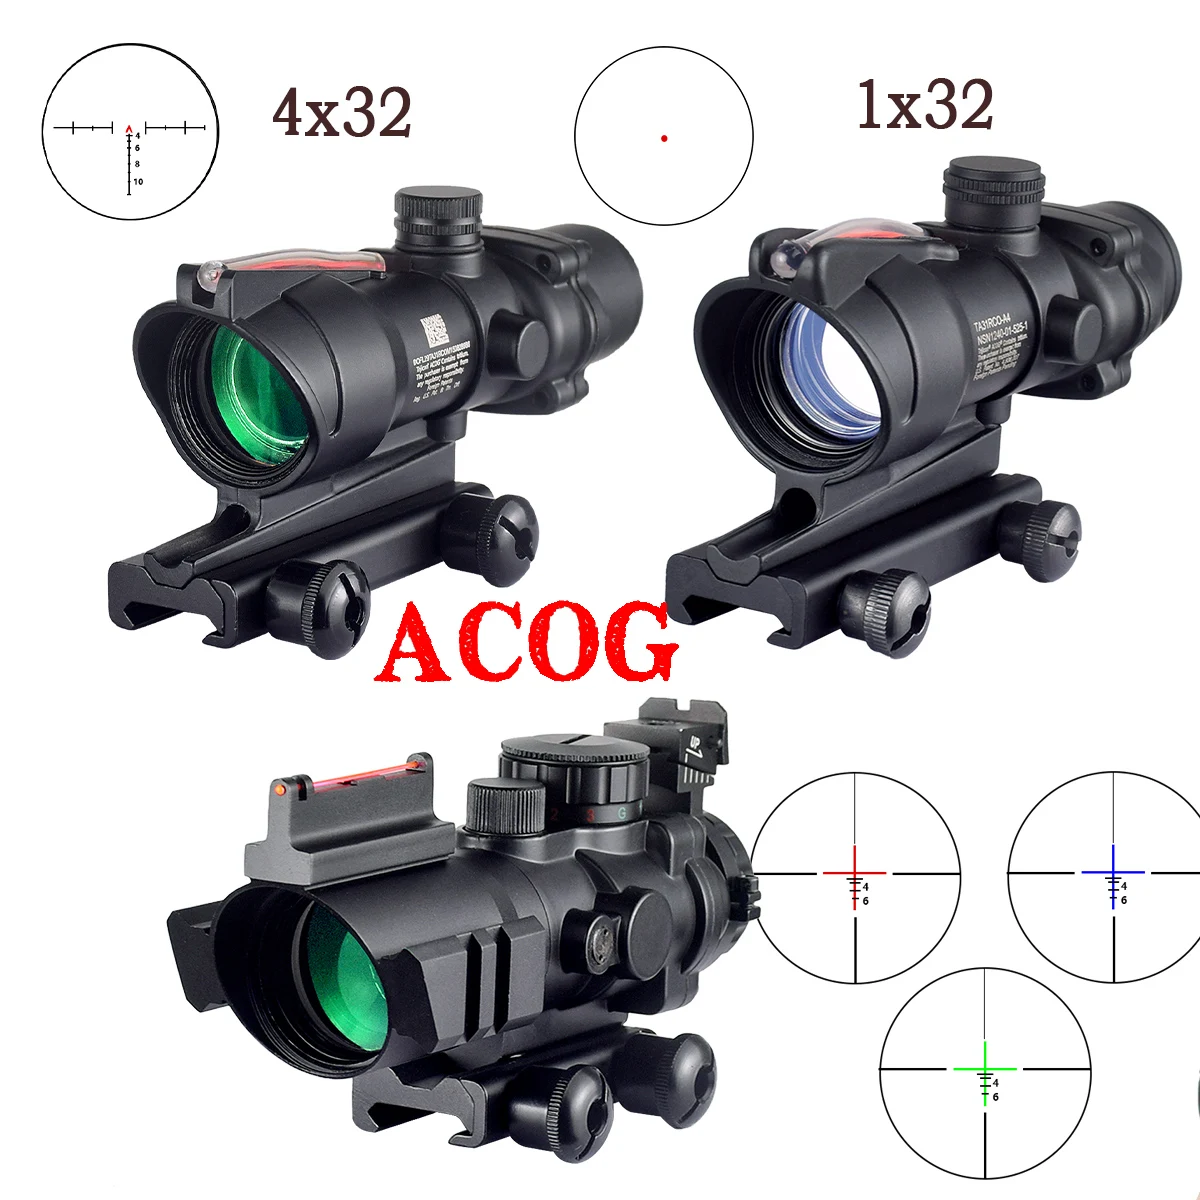 

Trijicon ACOG 4X32 1x32 Red Laser Scope Sight Green Real Fiber Optics Illuminated Glass Etched Reticle Tactical Rifle Optical